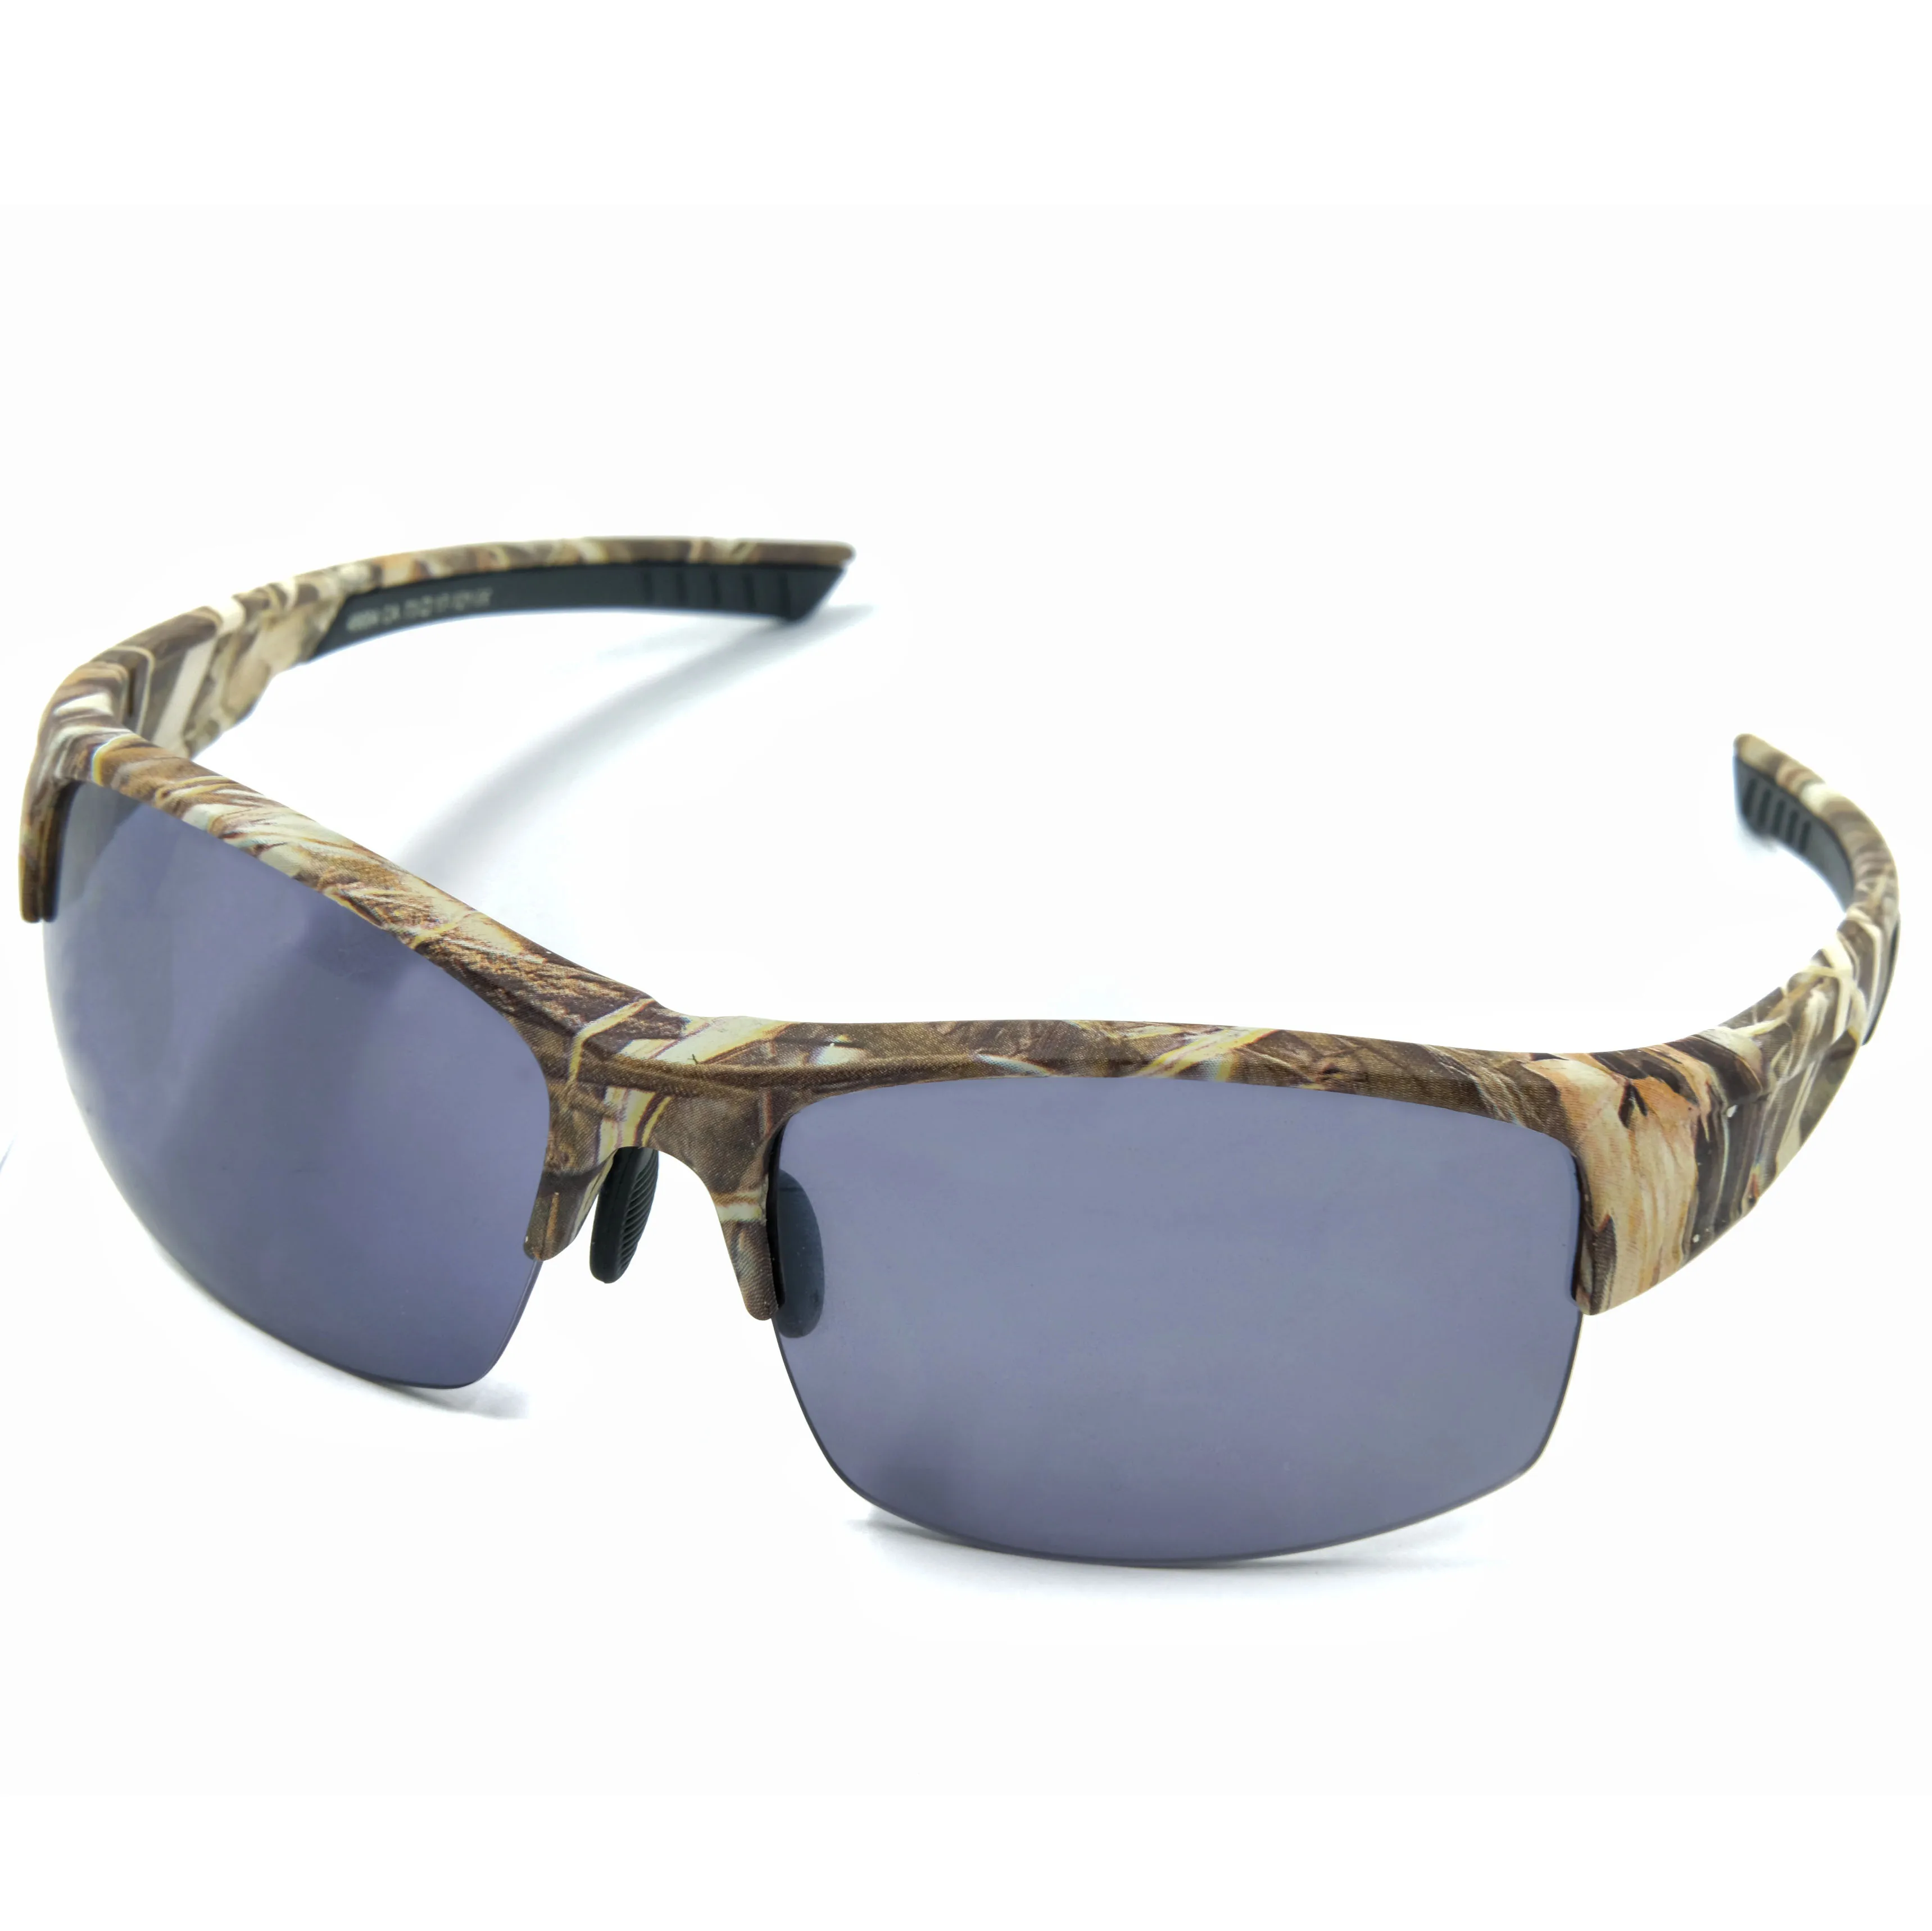 

Sun glasses river high contrast lenses newest ray band sports men sunglasses 2021 women shades fishing riding Hiking Camo TR90